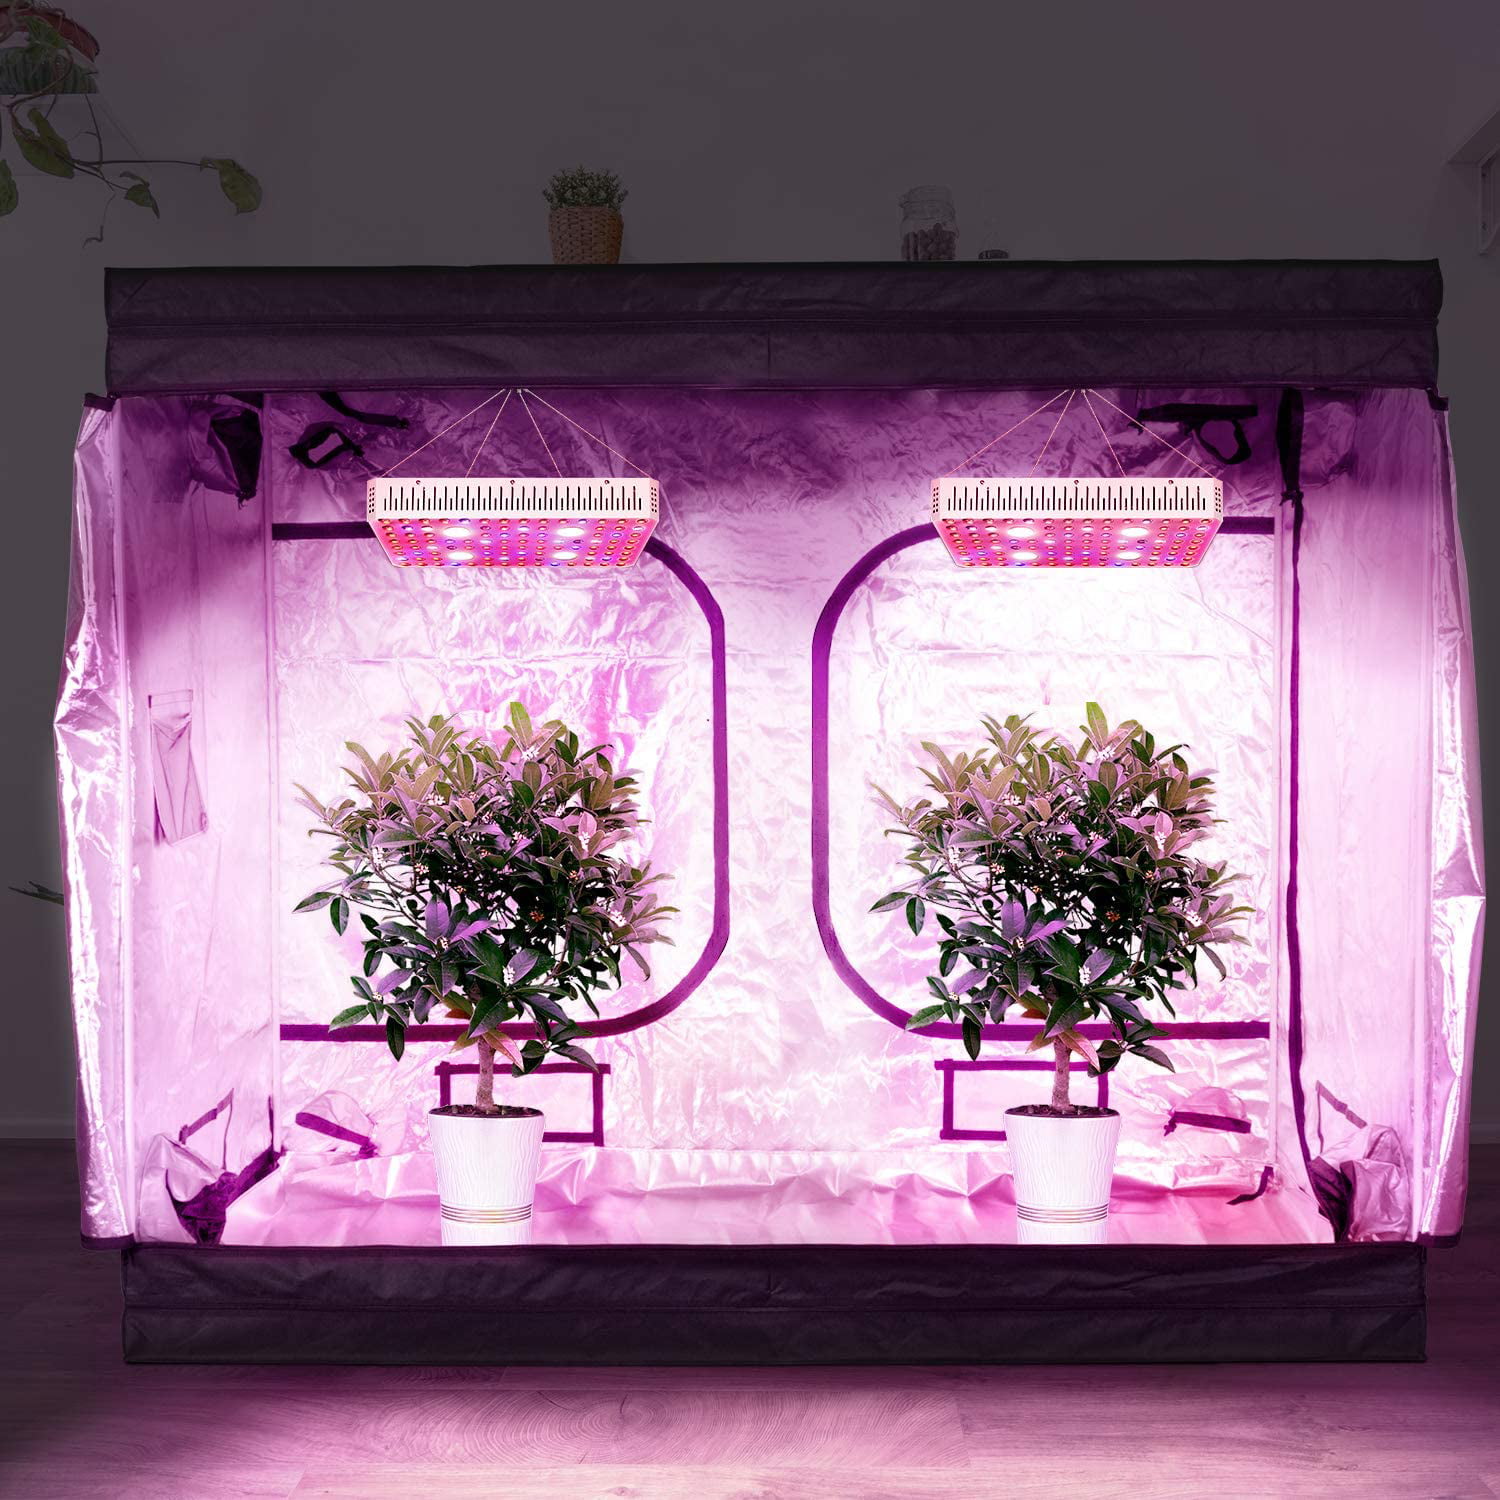 iPower GLLEDXCOB2000E 200W LED Plant Grow Light Full Spectrum with CREE COB and Adjustable Rope Indoor Hydroponics 